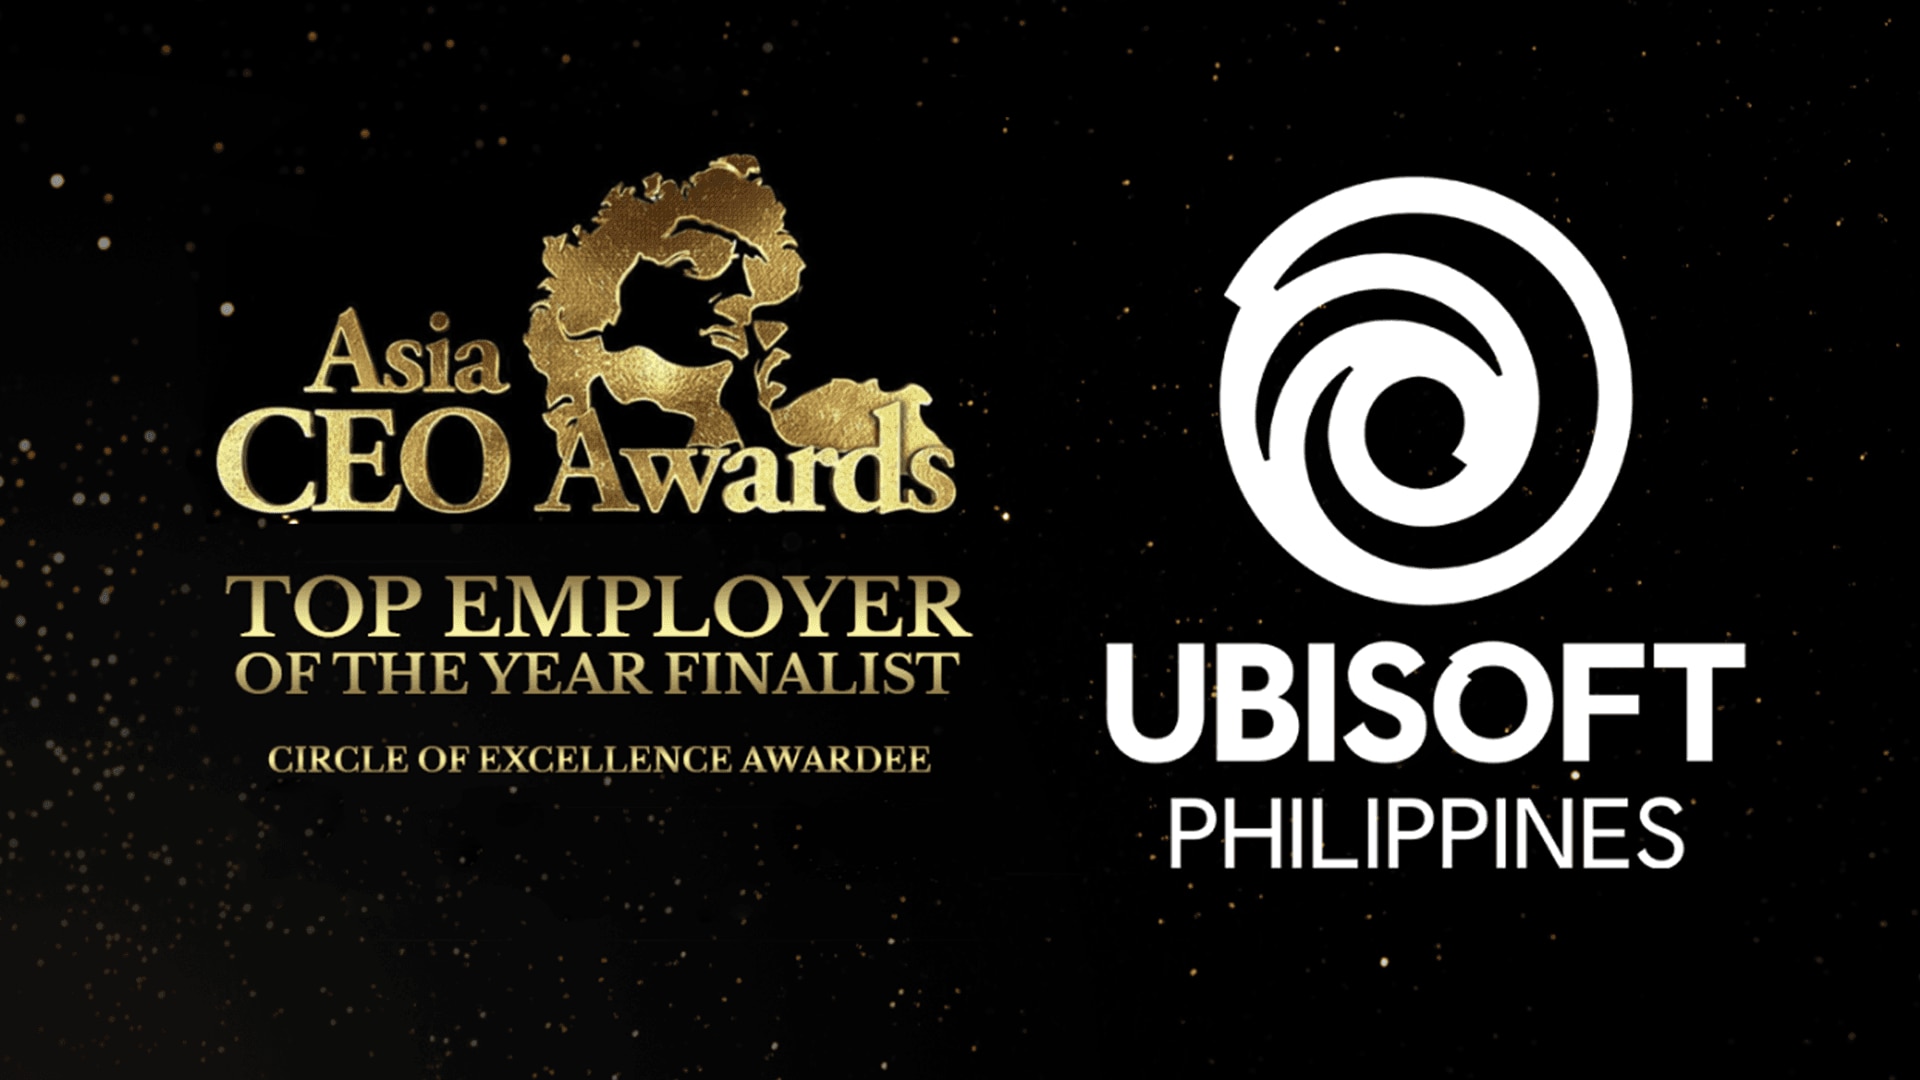 Ubisoft Philippines among Top Employer of the Year Circle of Excellence Awardees at Asia CEO Awards